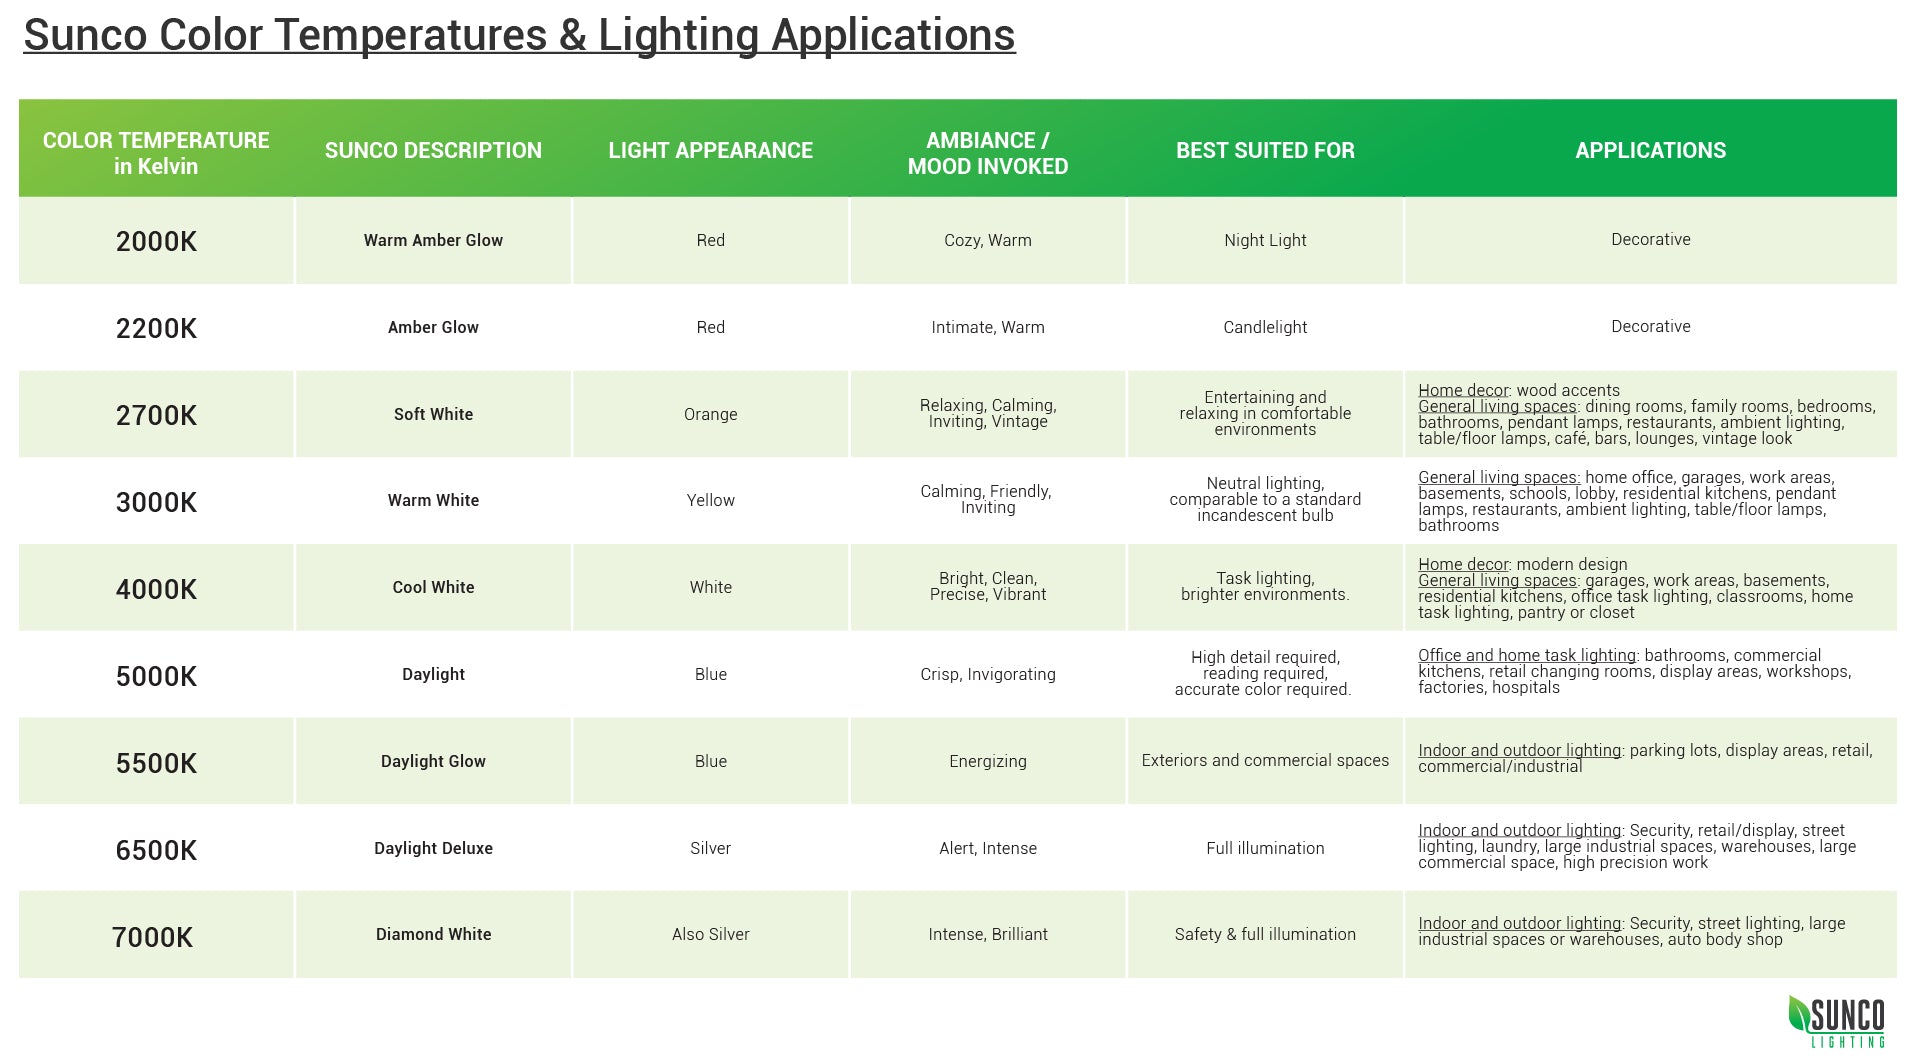 What Are The Different Types Of LED? - Practical Application